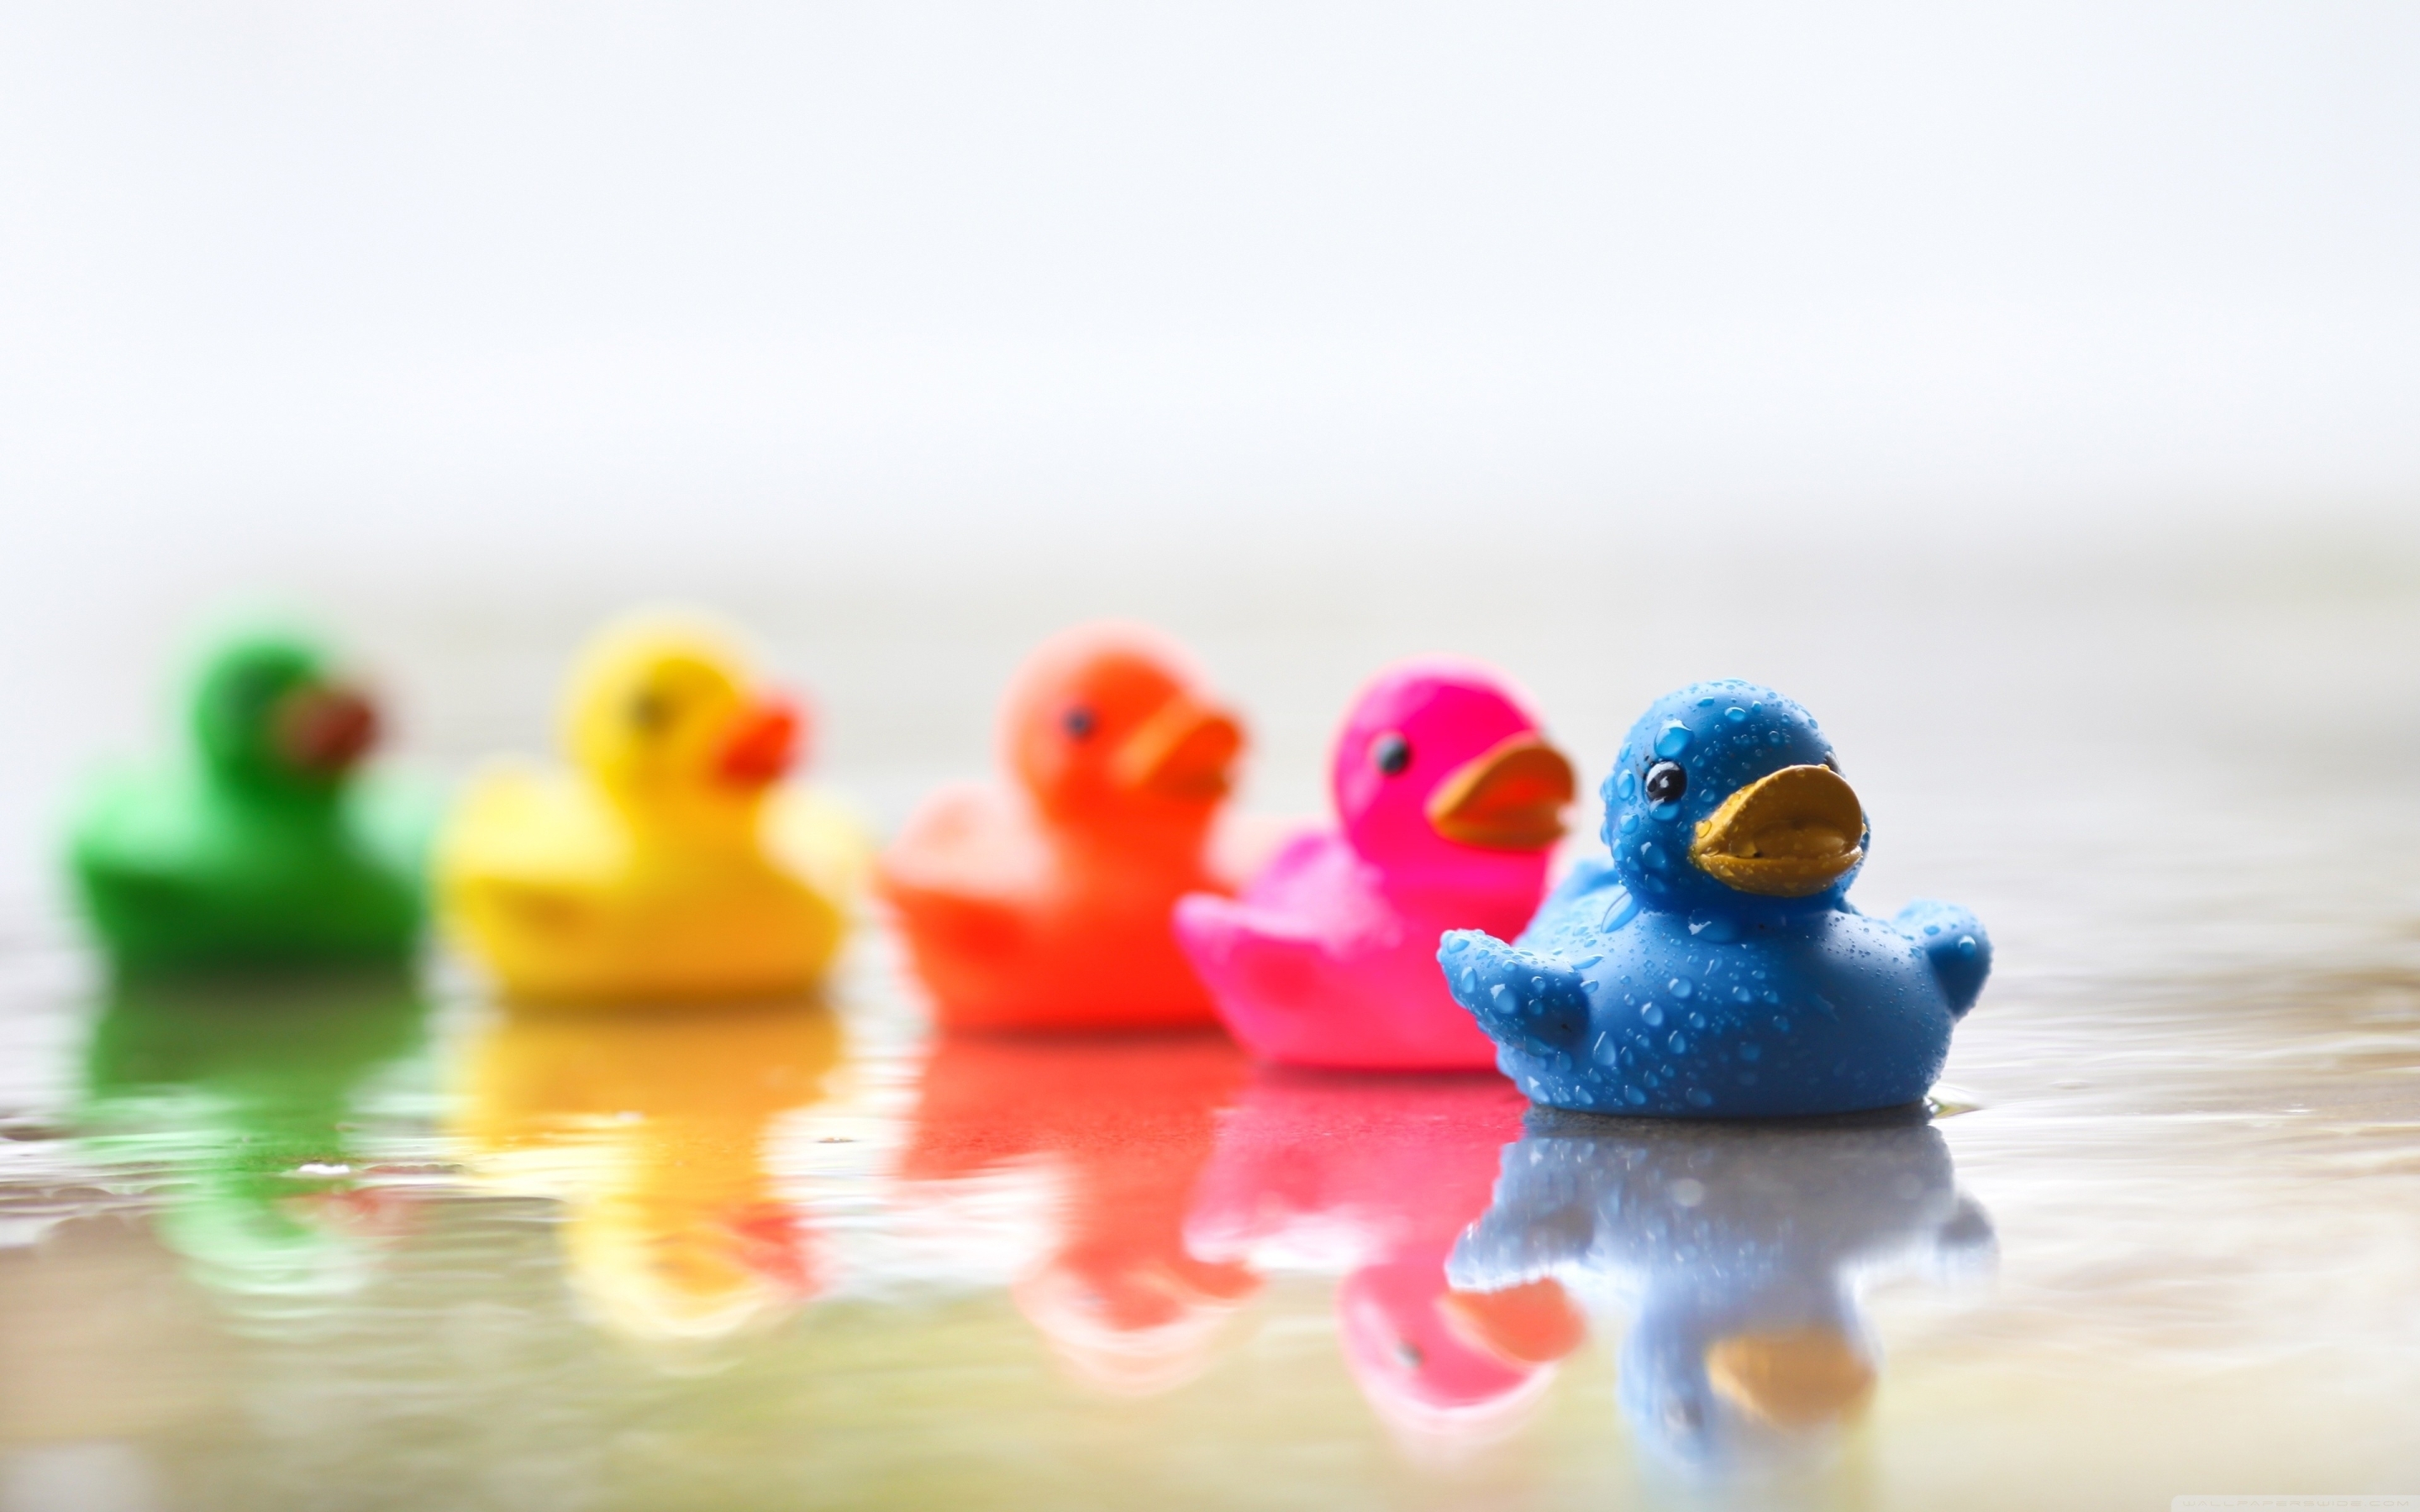 Cute Colourful Rubber Ducks for 2880 x 1800 Retina Display resolution